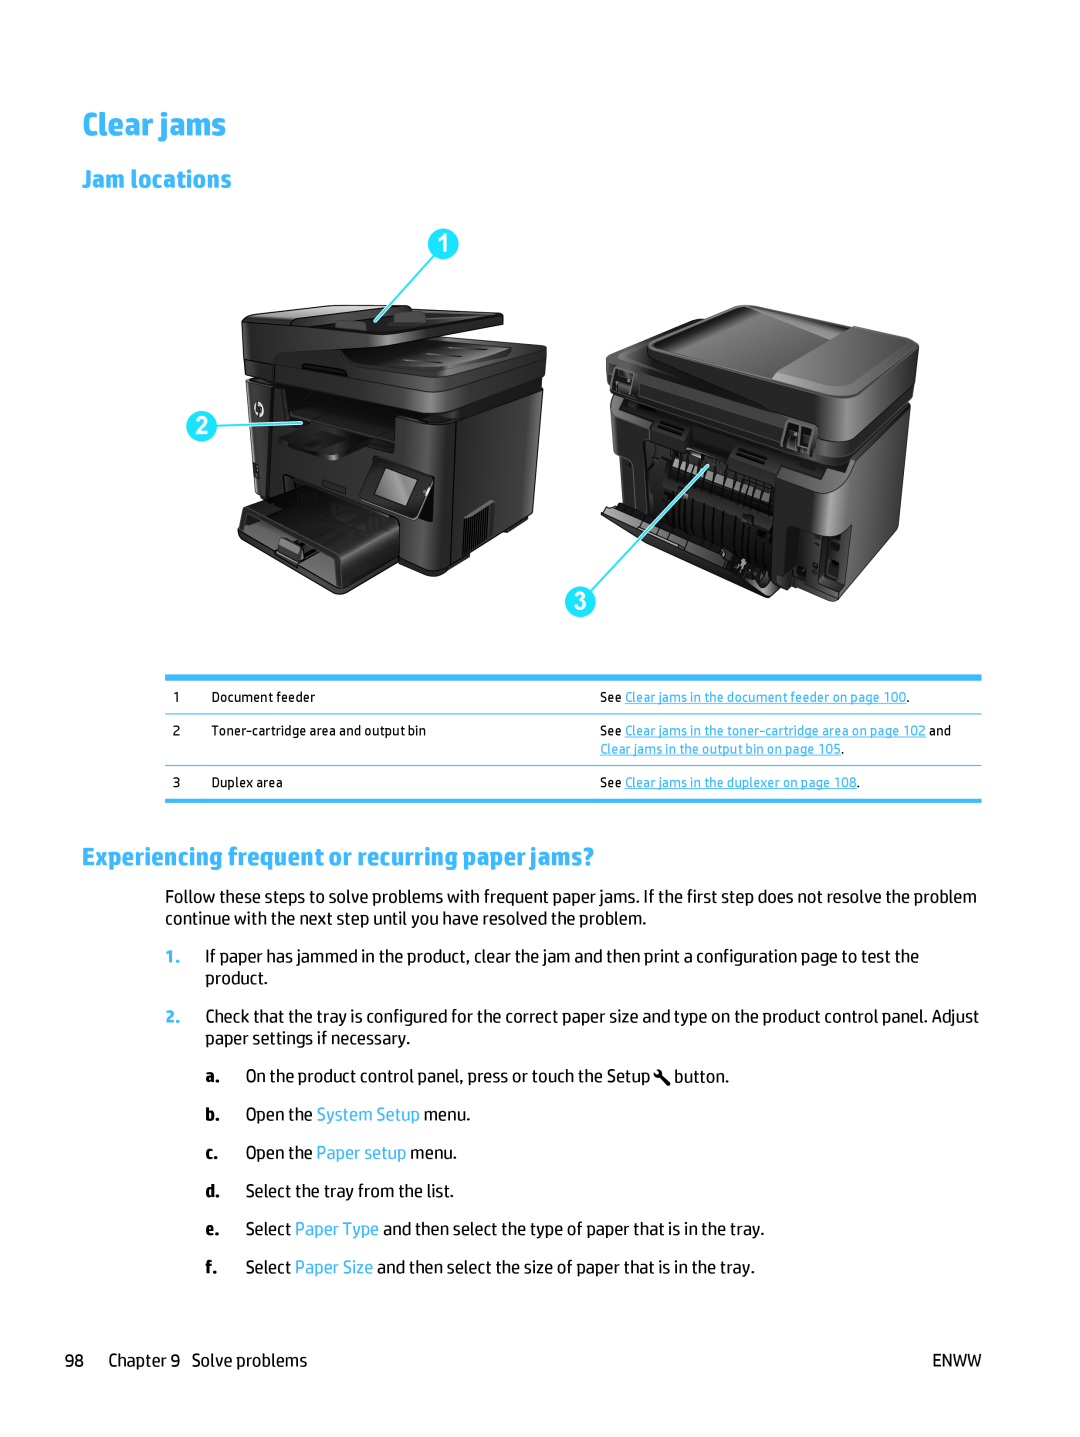 HP MFP M225dn, MFP M225dw manual Clear jams, Jam locations, Experiencing frequent or recurring paper jams? 